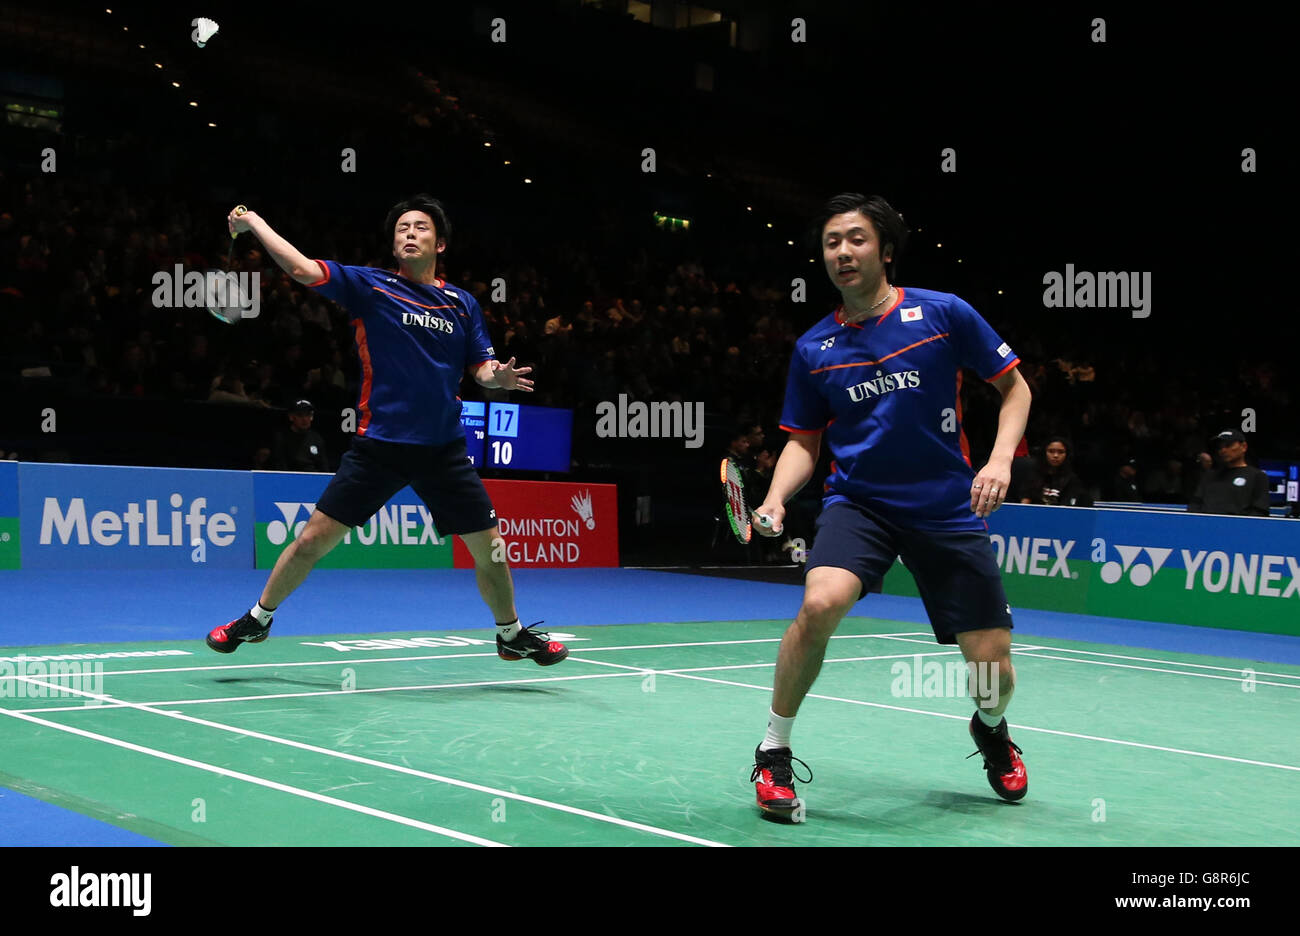 Japan's Kenichi Hayakawa (right) and Hiroyuki Endo during their doubles match on day two of the YONEX All England Open Badminton Championships at the Barclaycard Arena, Birmingham. PRESS ASSOCIATION Photo. Picture date: Thursday March 10, 2016. See PA story BADMINTON All England. Photo credit should read: Simon Cooper/PA Wire. Stock Photo